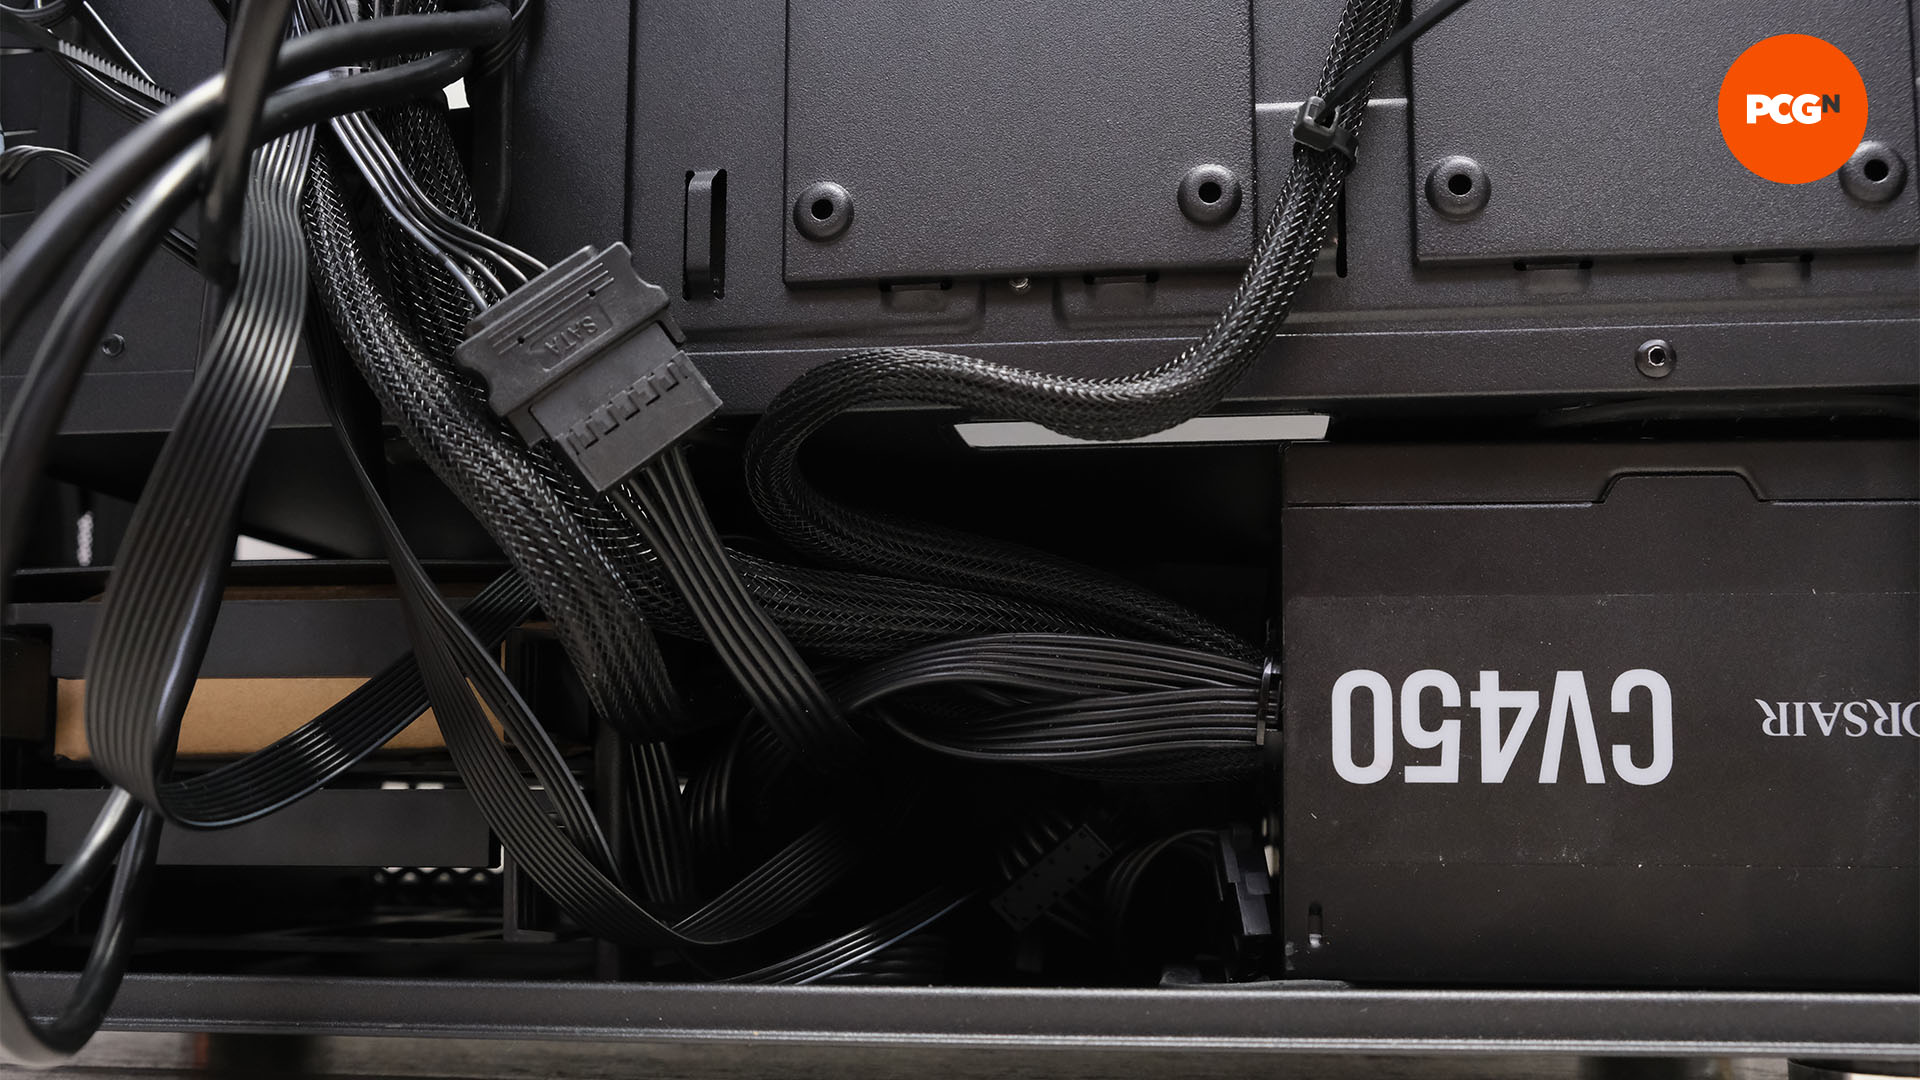 How to build a gaming PC: Stow cables in the PSU area